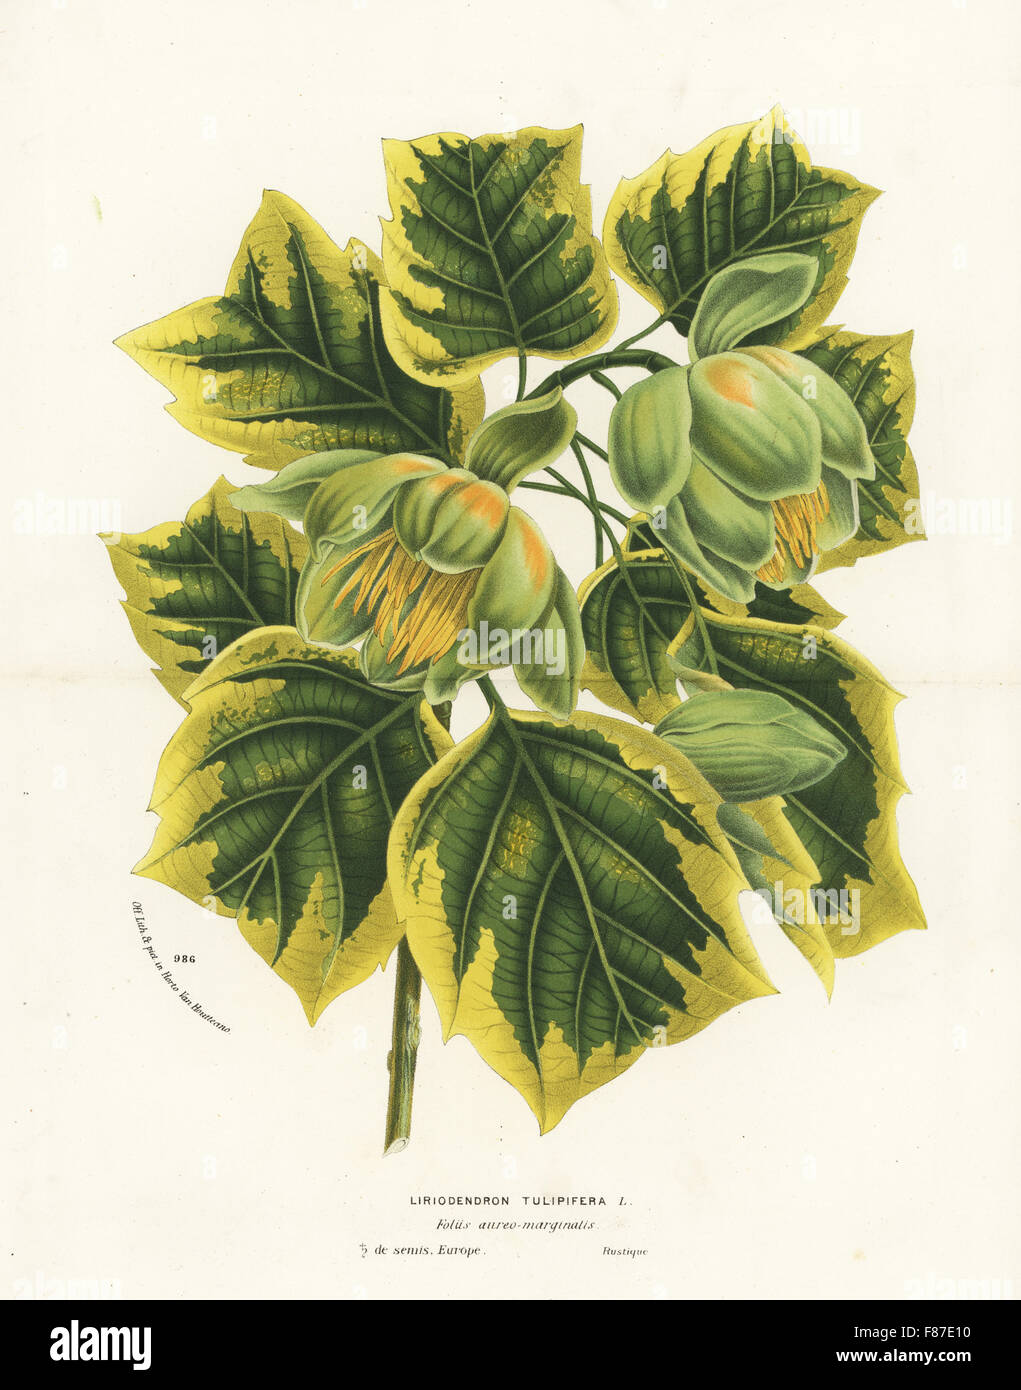 Tulip tree, Liriodendron tulipifera foliis aureo-marginatis. Handcoloured lithograph from Louis van Houtte and Charles Lemaire's Flowers of the Gardens and Hothouses of Europe, Flore des Serres et des Jardins de l'Europe, Ghent, Belgium, 1874. Stock Photo